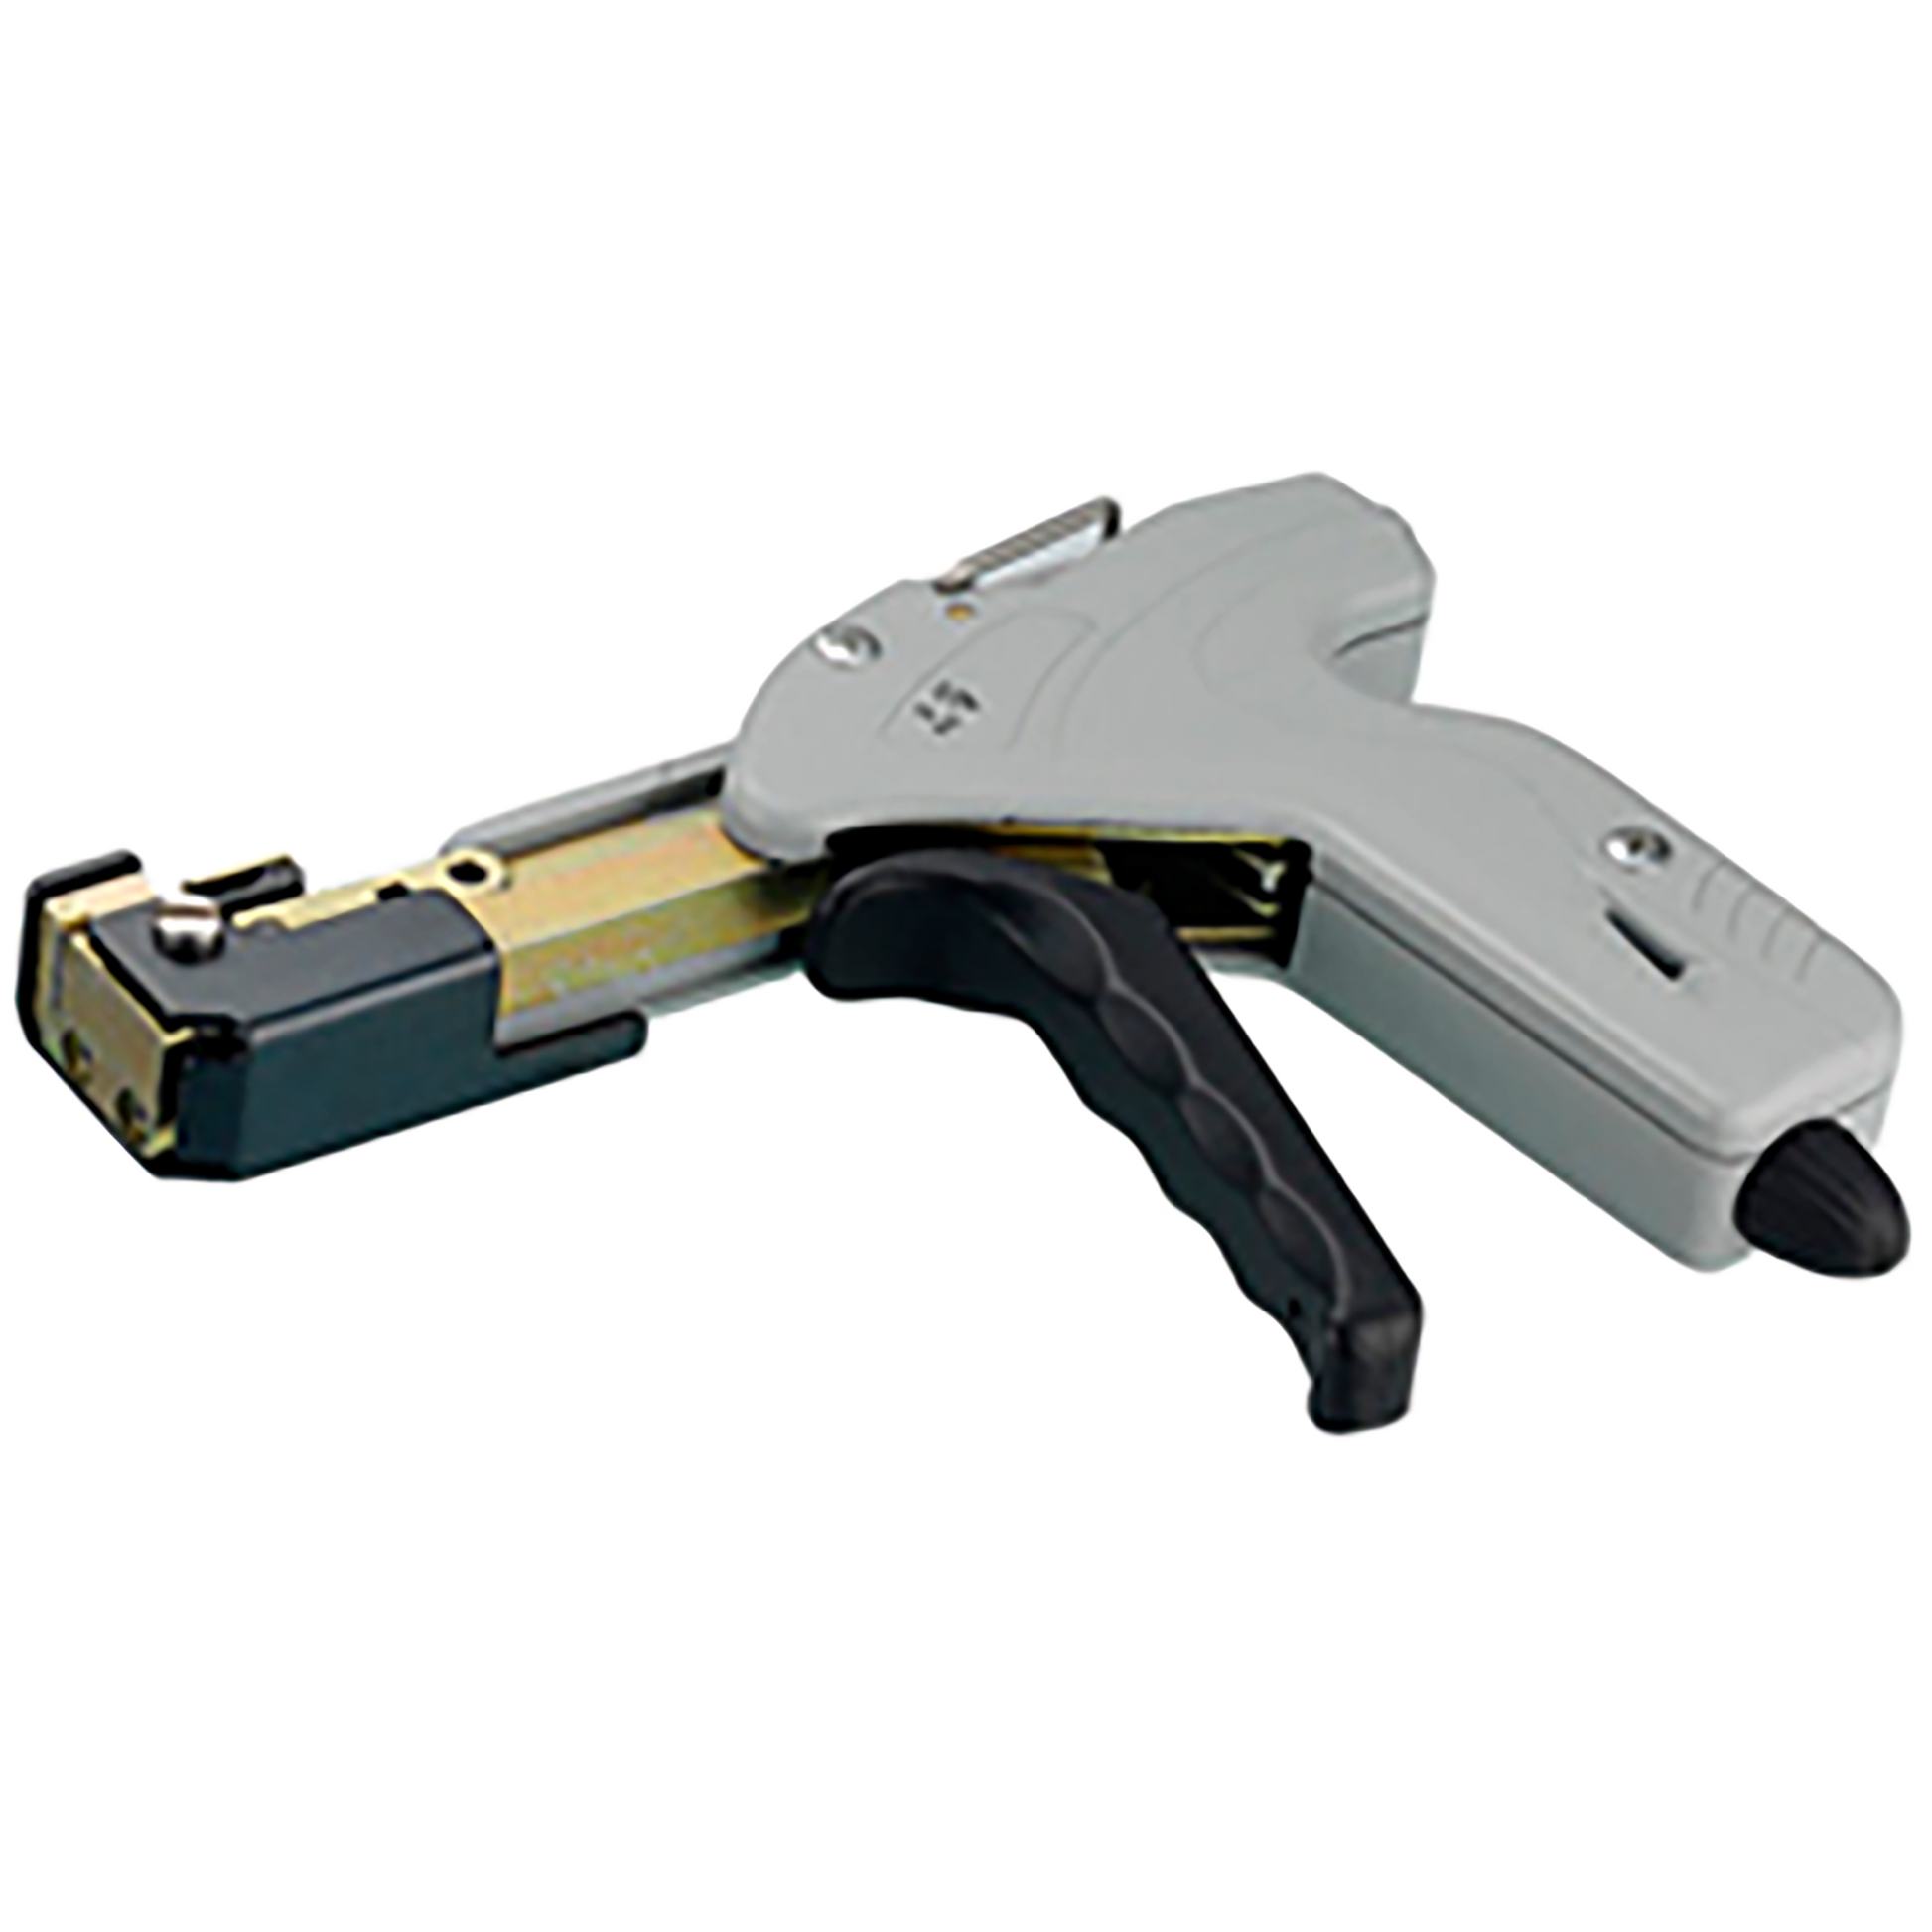 ZTY-SS Cable Tool Cable Tie Gun